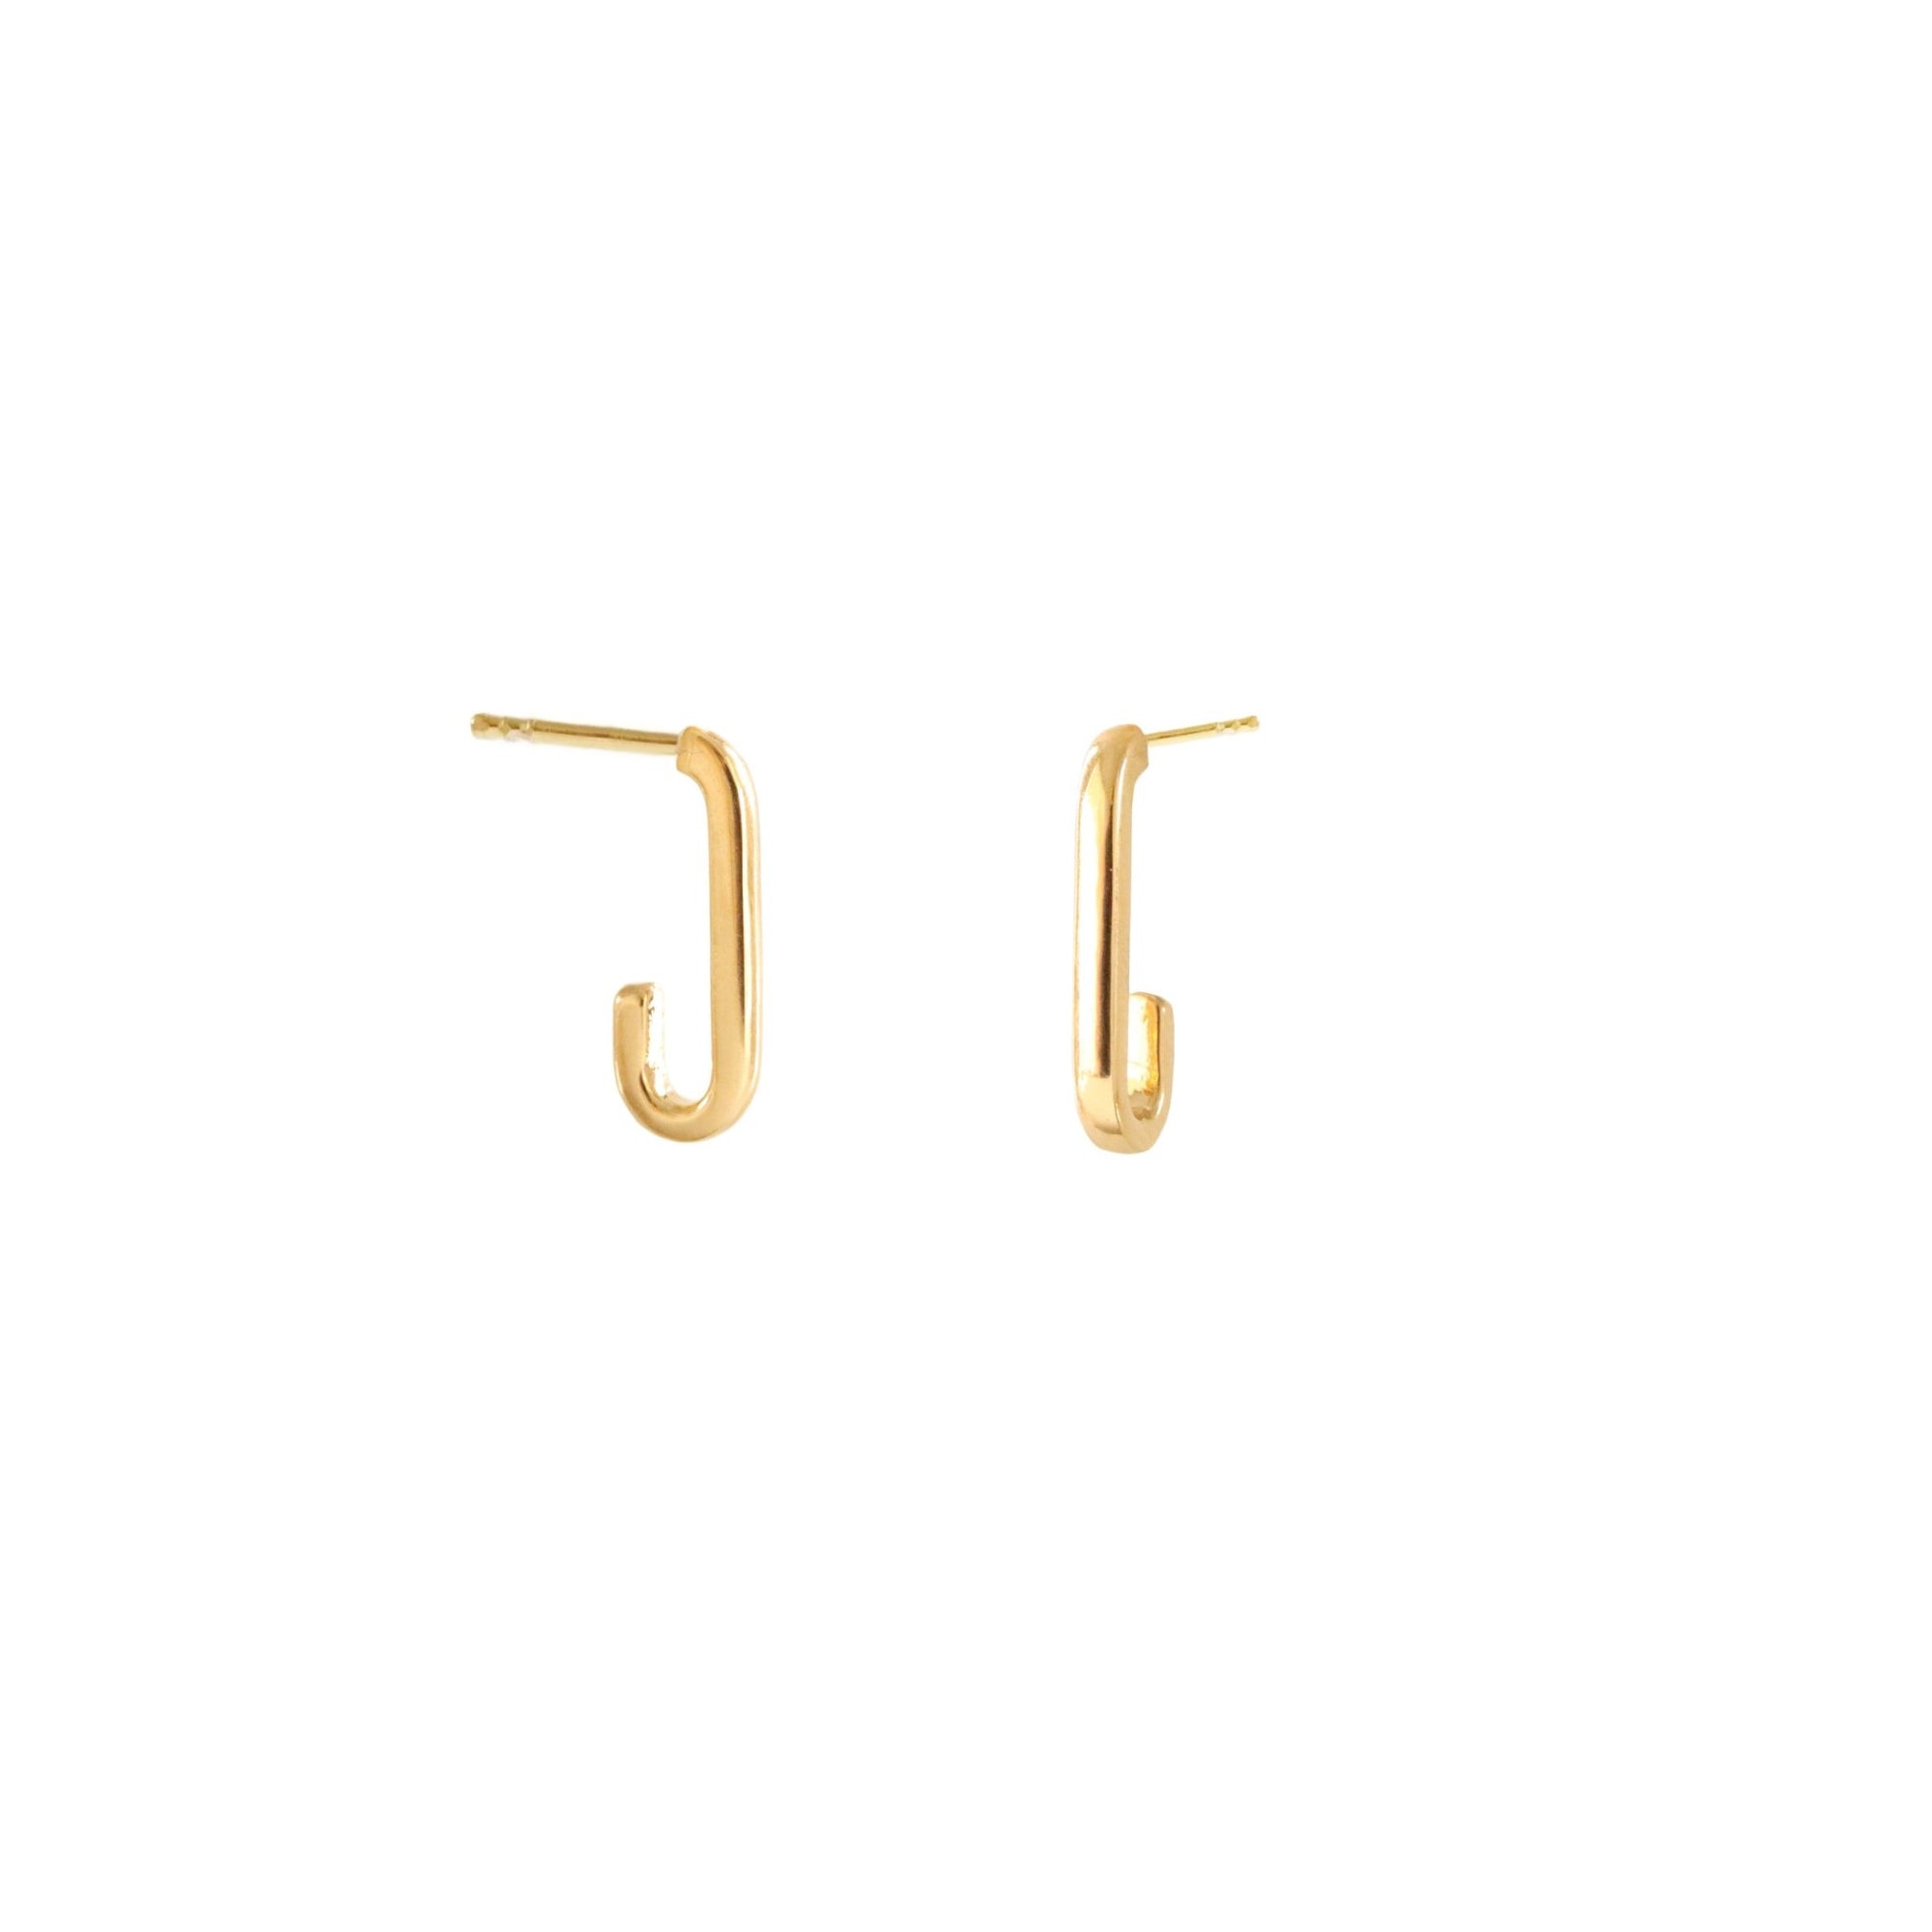 POISE OVAL HUGGIE HOOPS- GOLD - SO PRETTY CARA COTTER